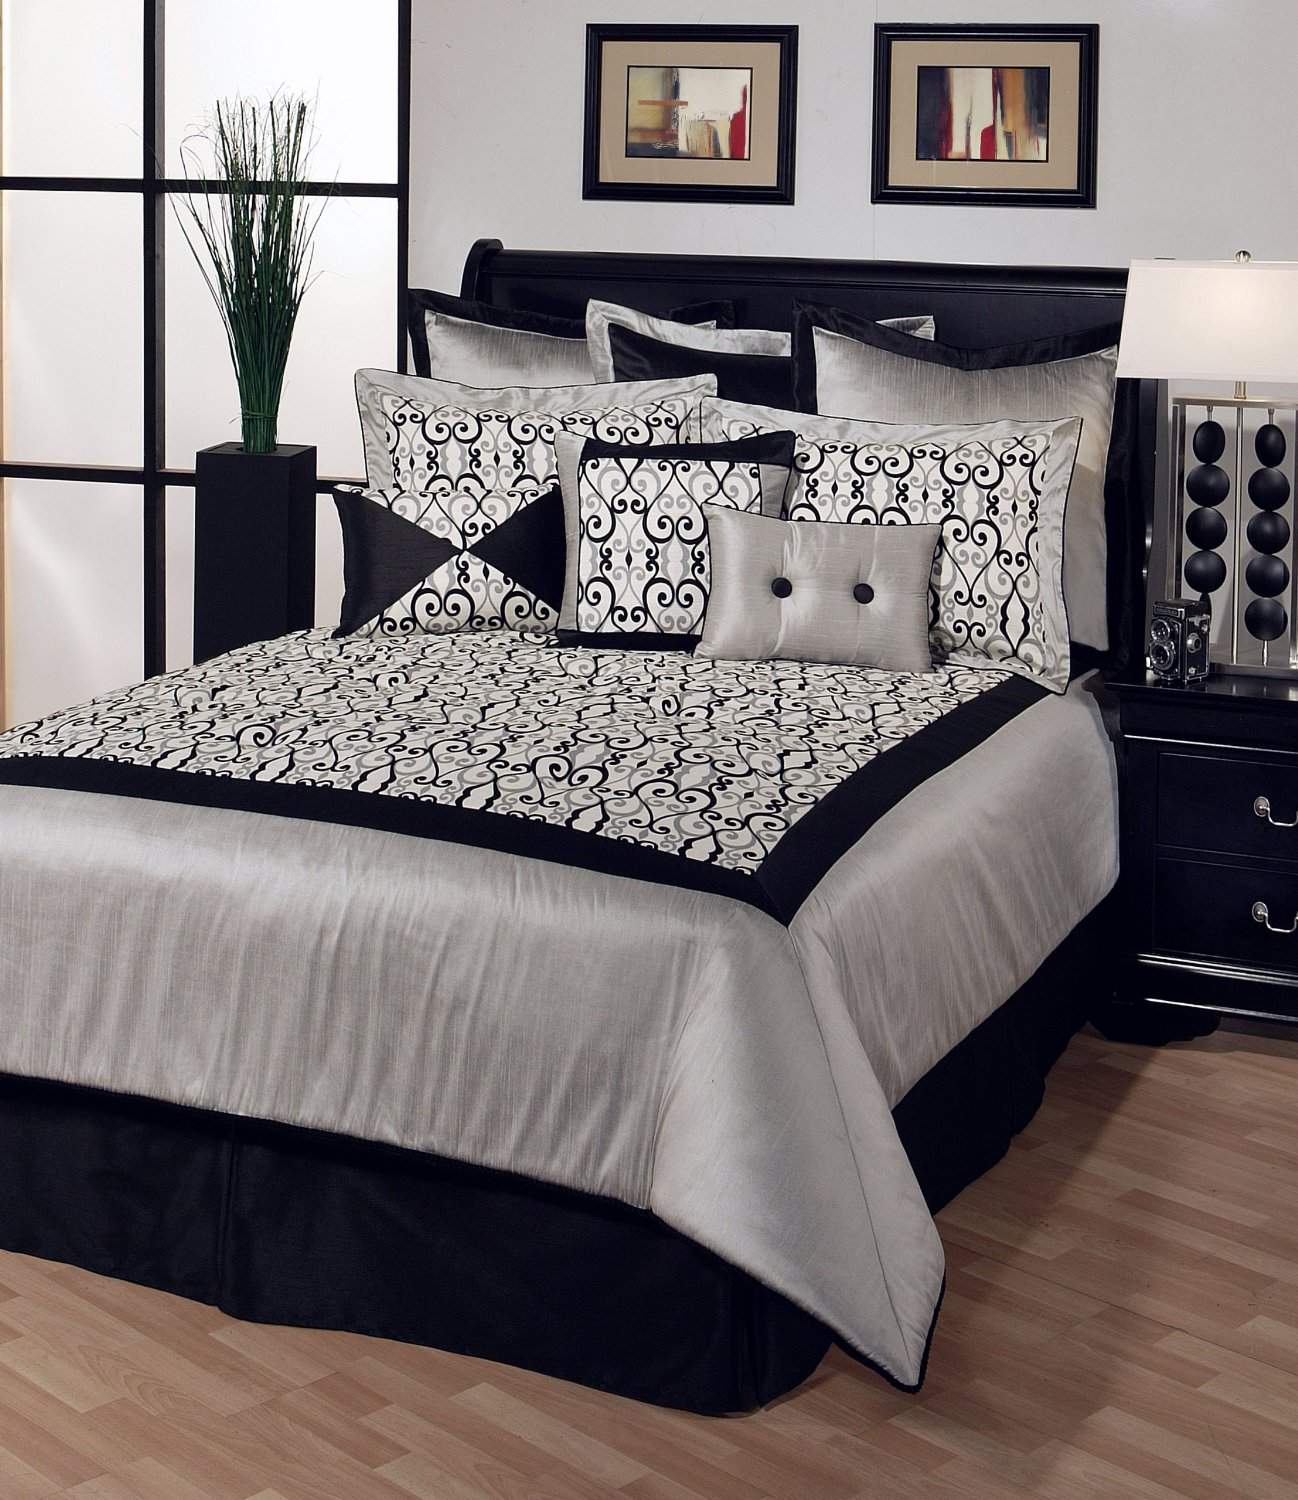 Black and White Bedroom Decorating Ideas